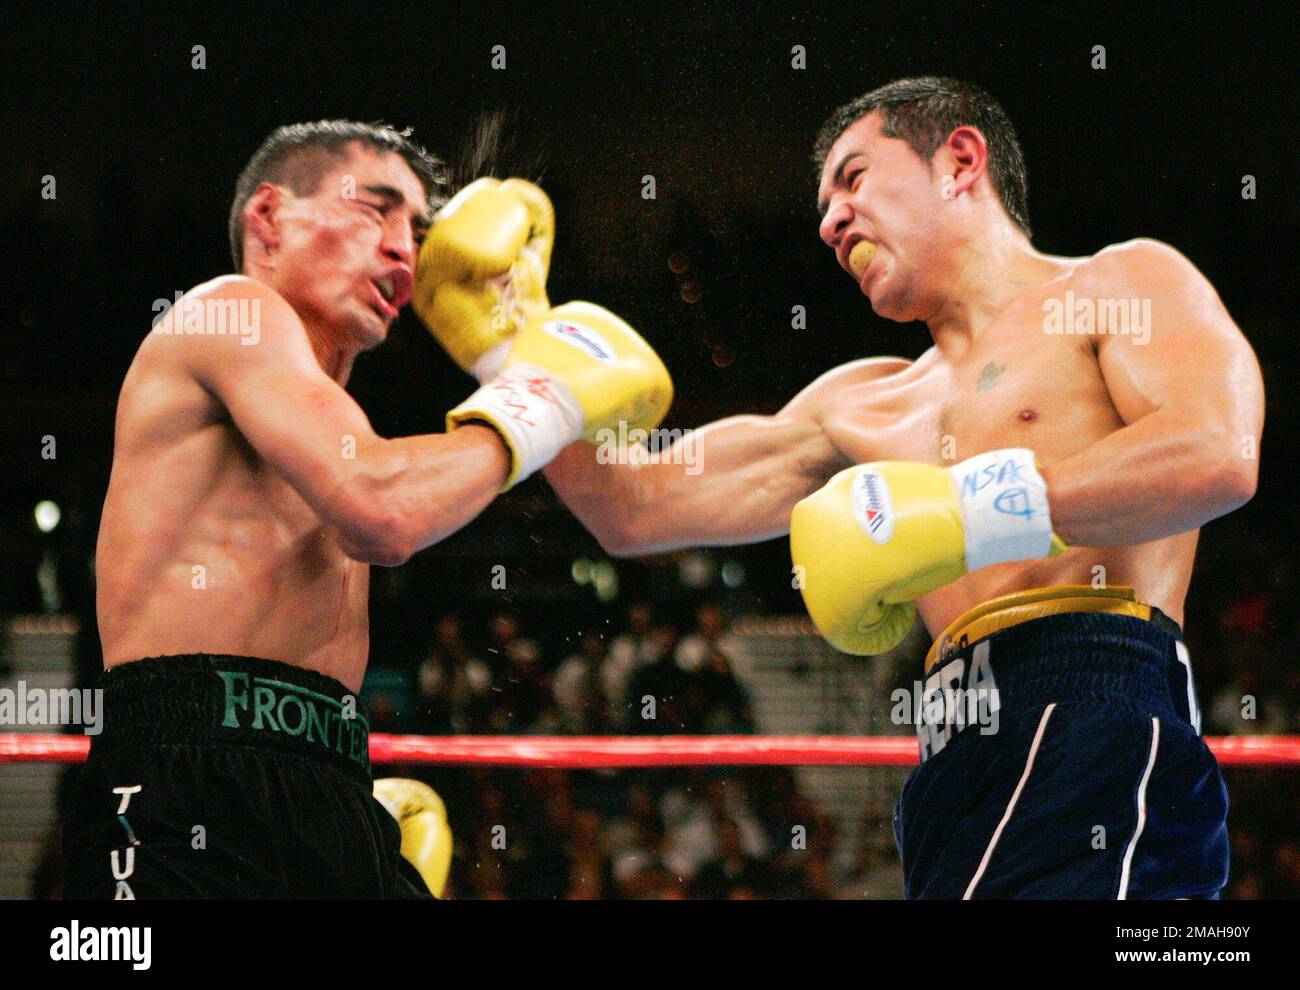 https://c8.alamy.com/comp/2MAH90Y/file-erik-morales-left-of-mexico-and-marco-antonio-barrera-of-mexico-trade-punches-in-the-11th-round-of-their-wbc-super-featherweight-title-fight-on-nov-27-2004-at-the-mgm-grand-garden-arena-in-las-vegas-the-two-mexican-greats-gave-their-all-in-three-bouts-over-nearly-five-years-providing-the-defining-moments-of-both-fighters-careersap-photomark-j-terrill-file-2MAH90Y.jpg